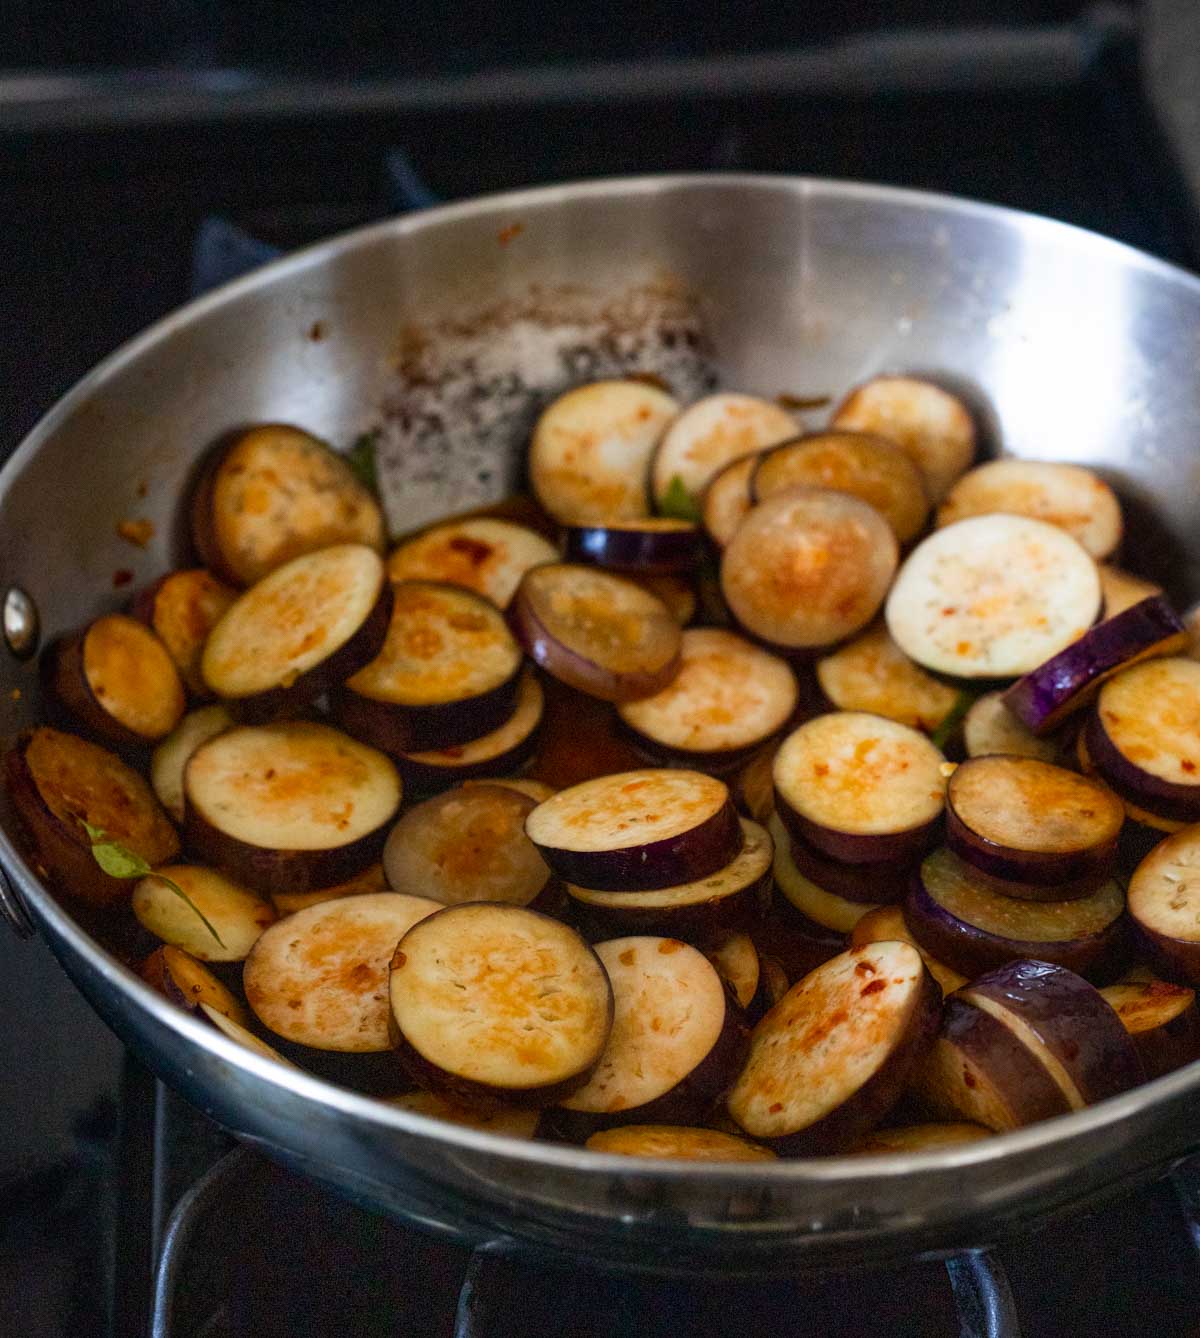 Slices of eggplant cooking in a skillet.